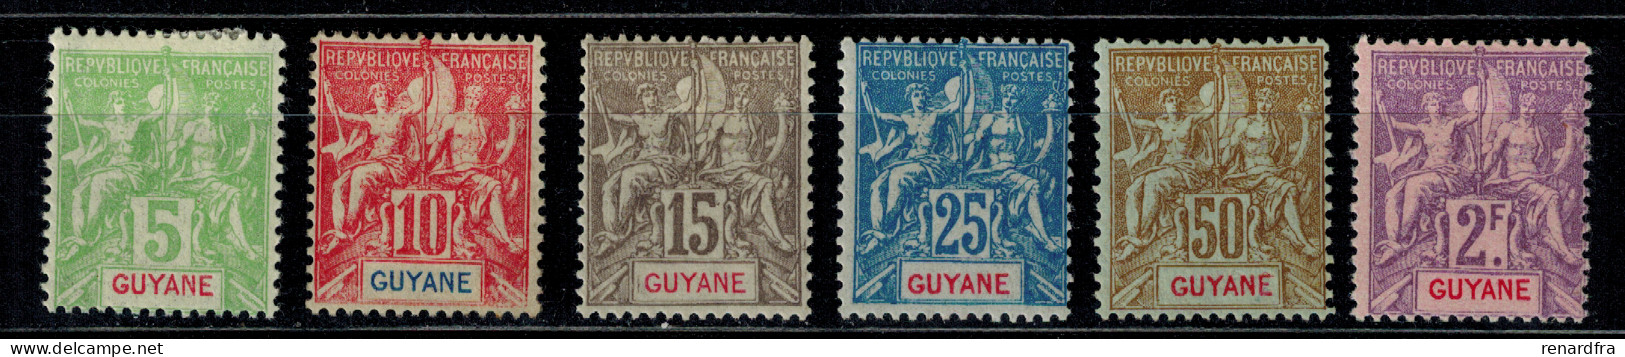 Timbres De Guyane N° 43, 44, 45, 46, 47, 48 Neuf * / MH - Unused Stamps